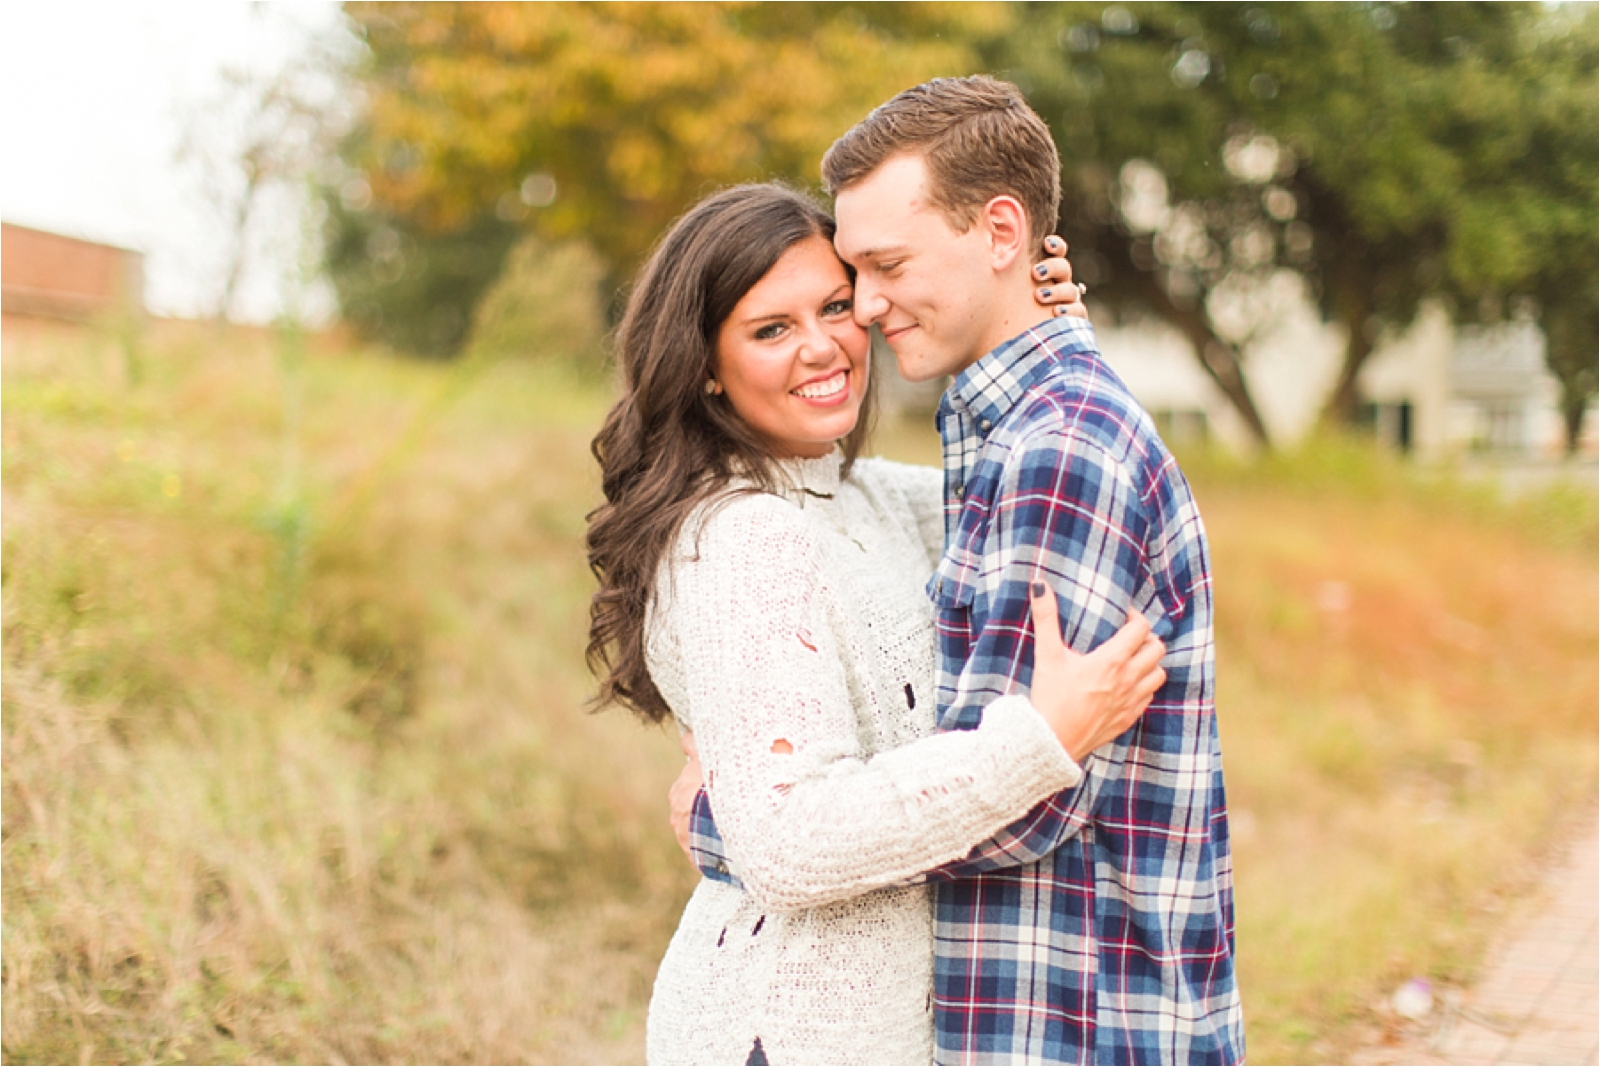 Fort Conde Engagement Session Photographer | Josi + J.R.